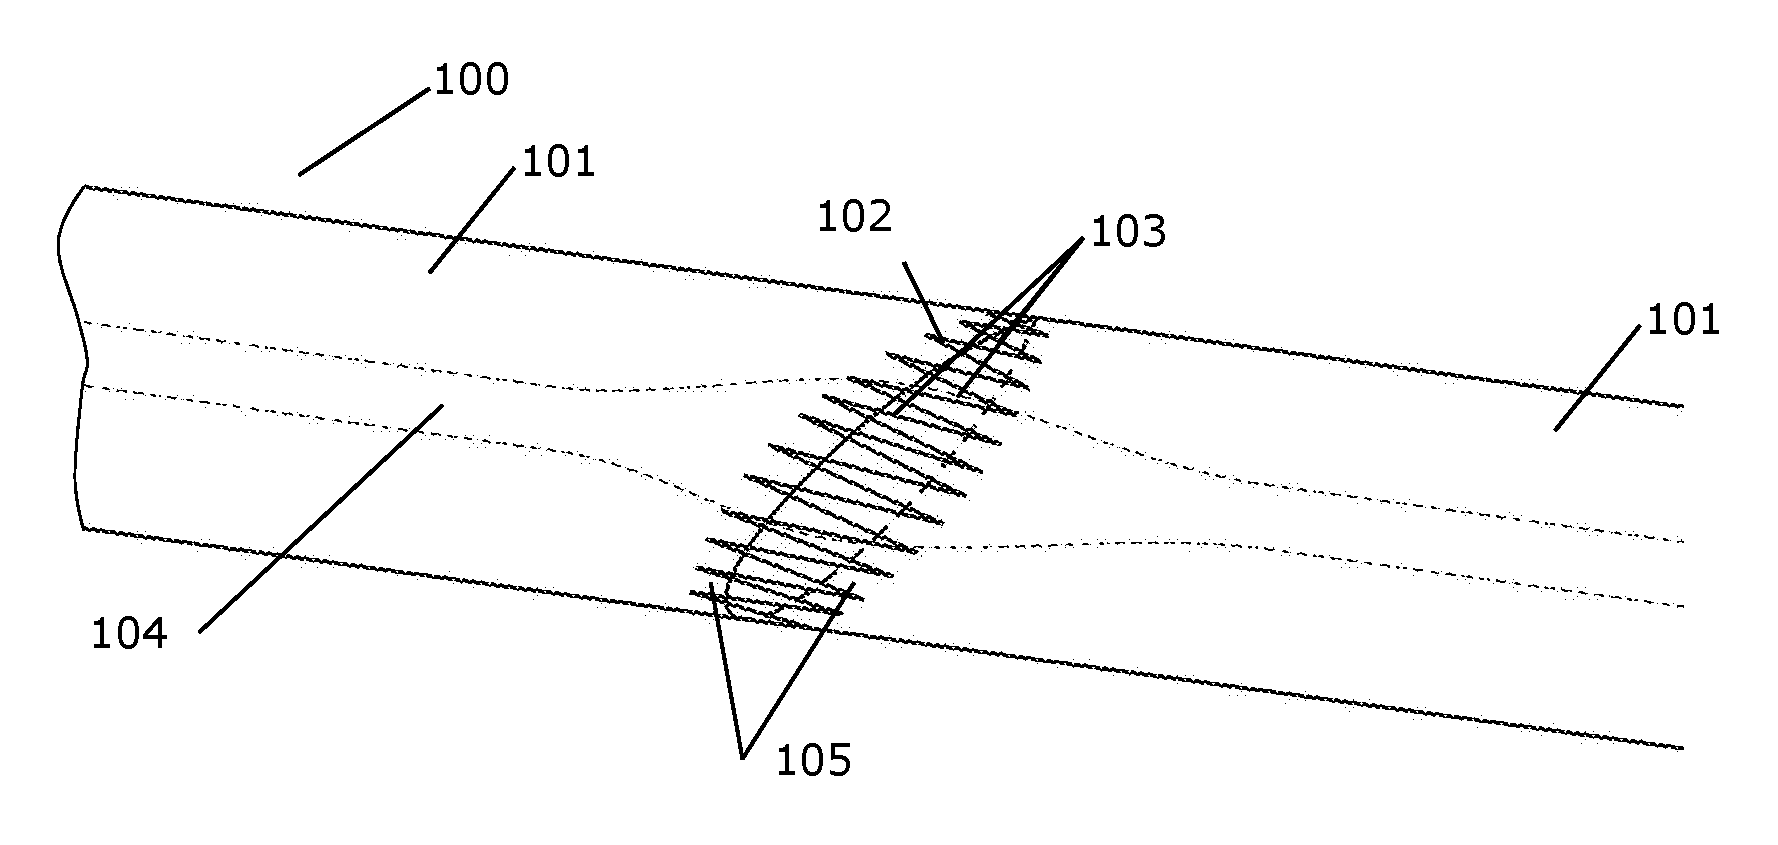 Wind turbine blade with sections that are joined together